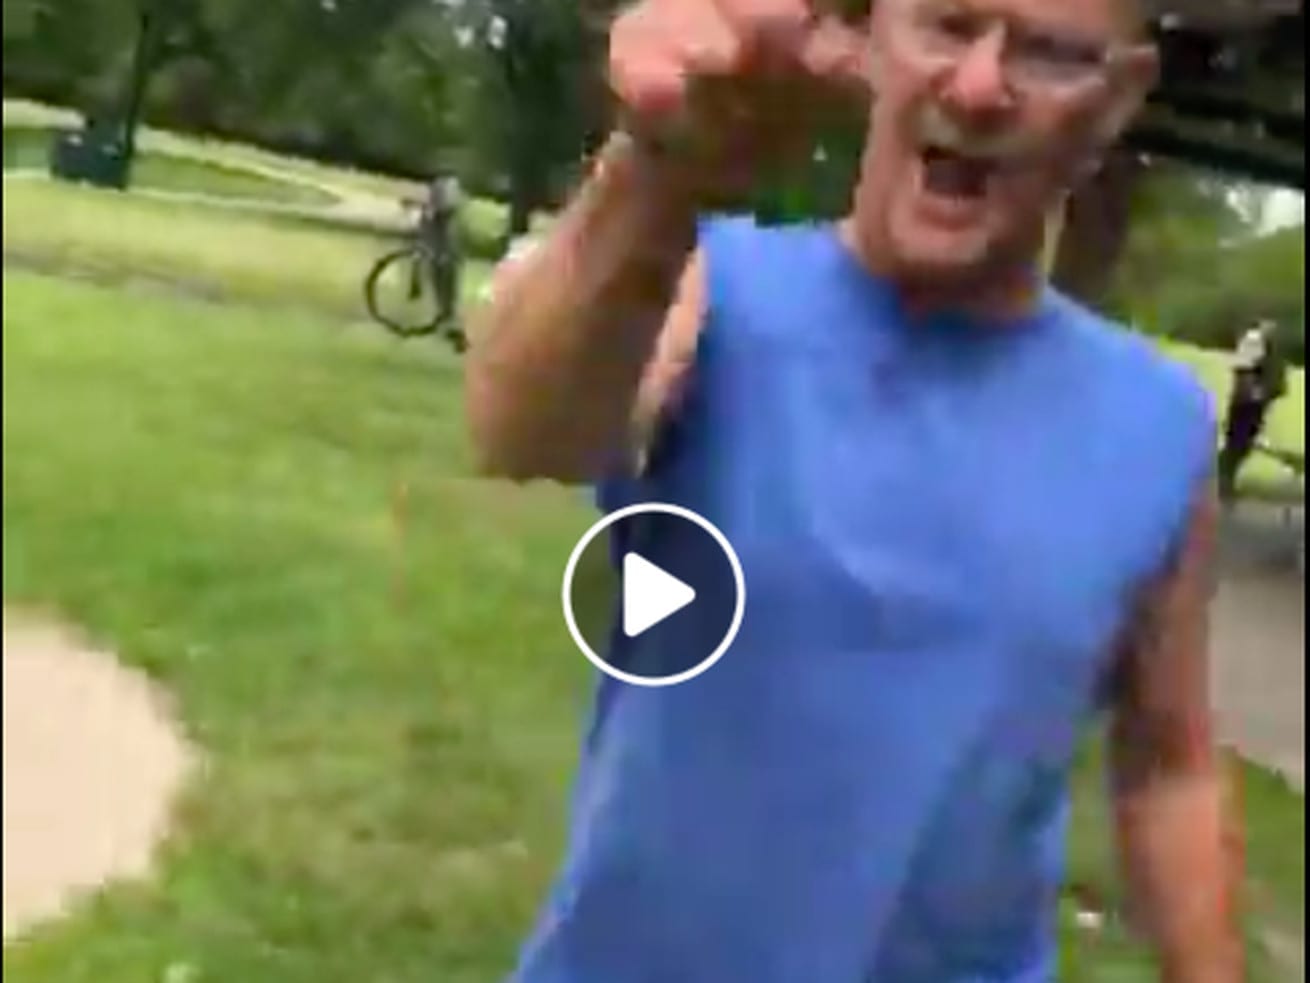 Watch: a man berates a woman in a public park for wearing a Puerto Rico shirt